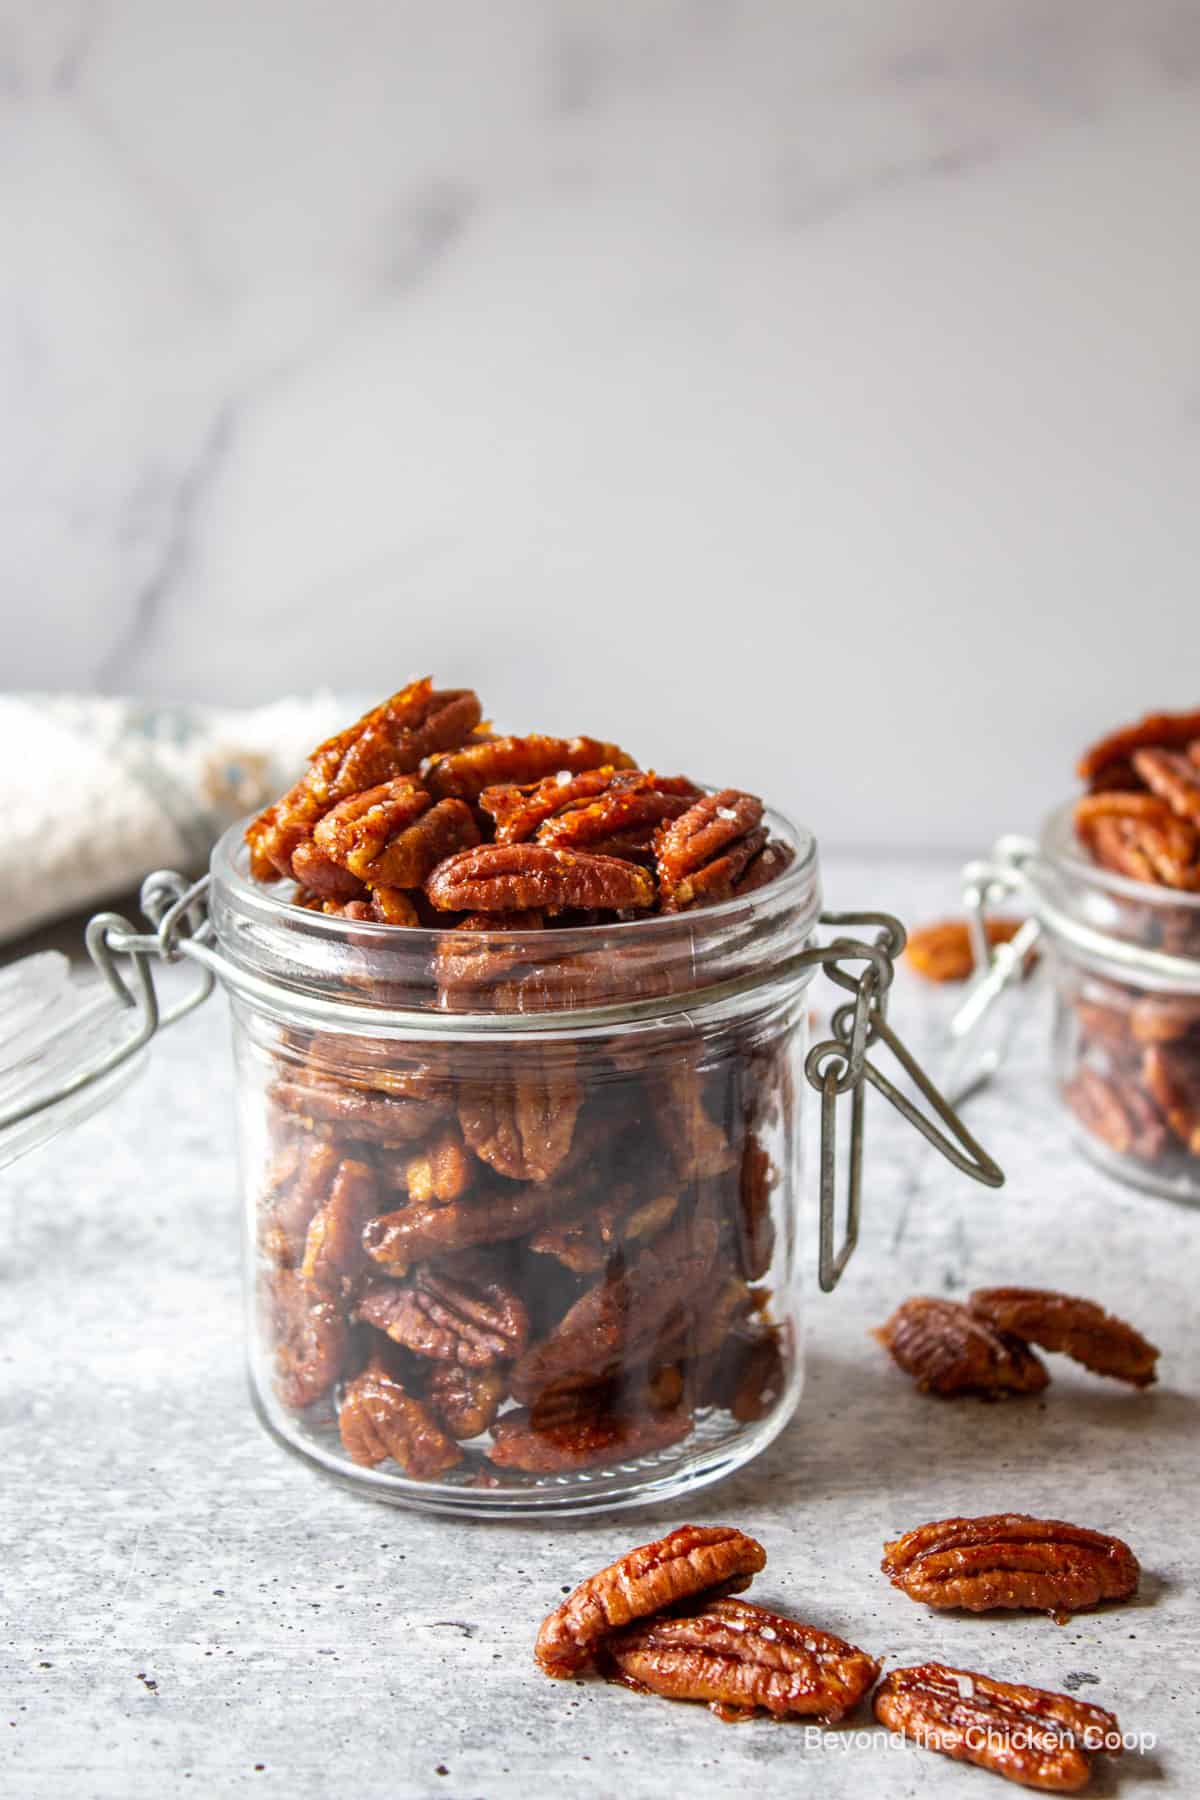 Spiced nuts in a glass container.